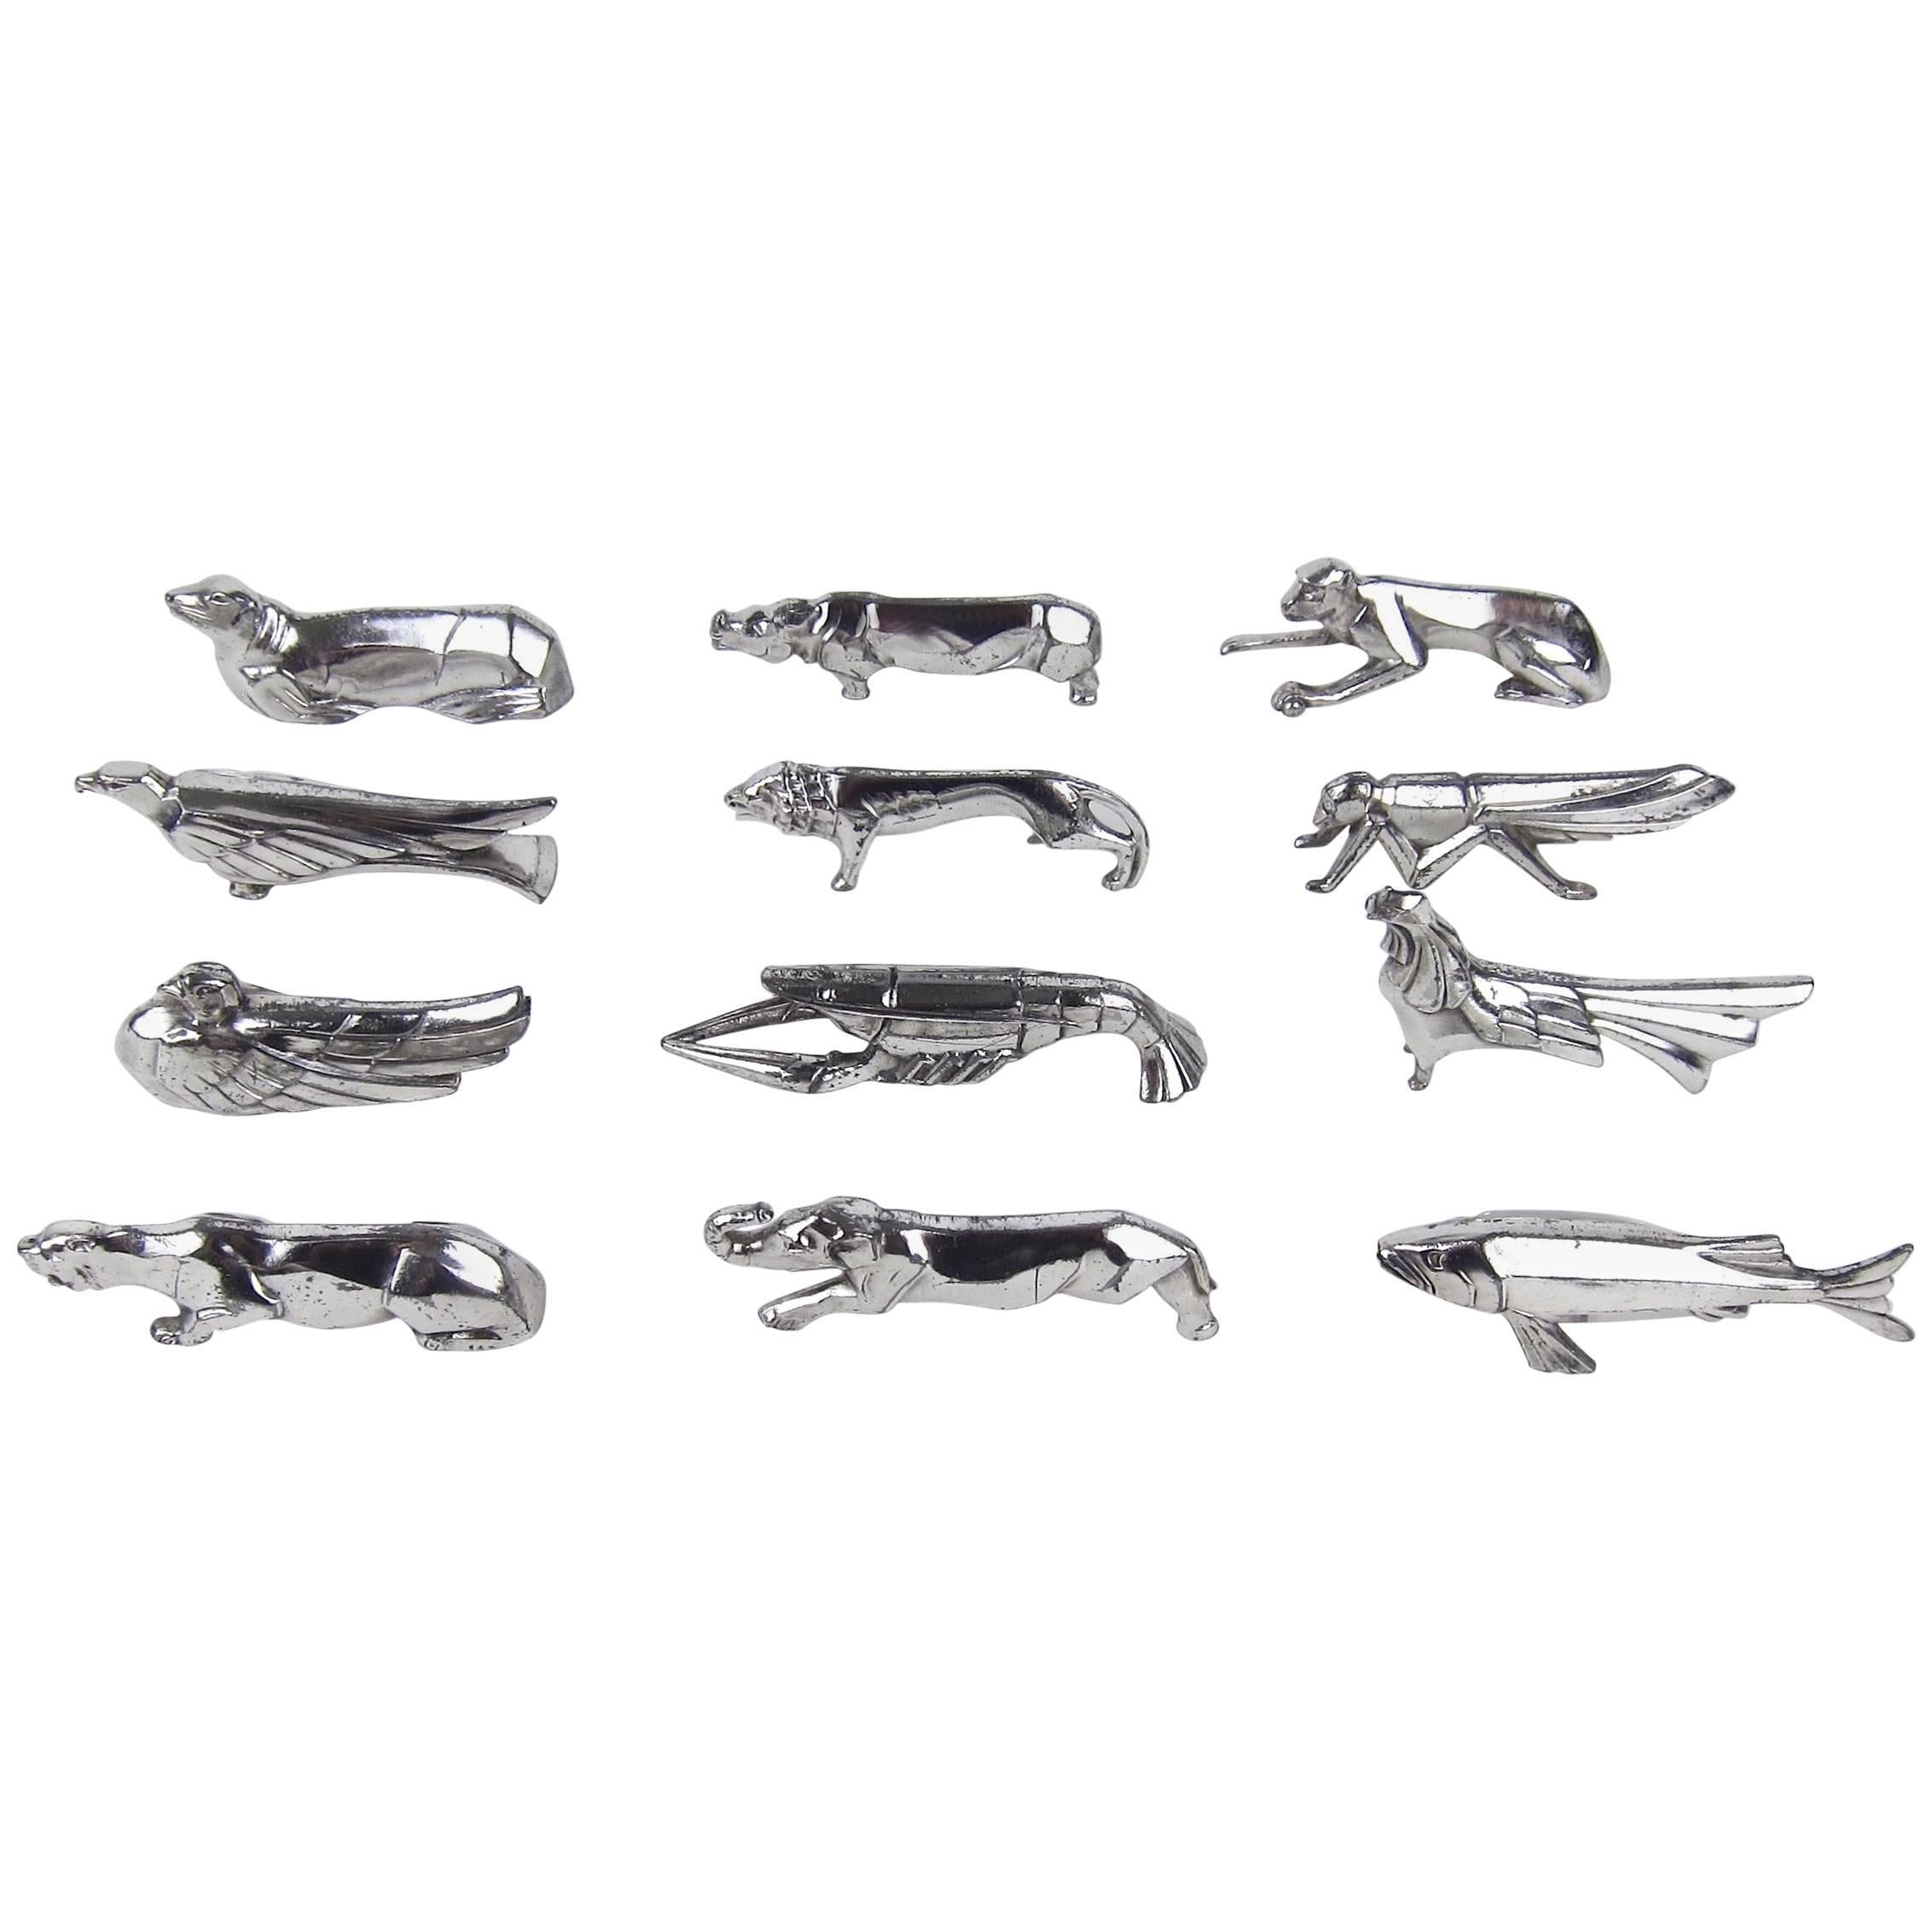 A complete set of 12 Art Deco animal knife rests in their original fitted case. The chromium plated cast metal animals are likely of European origin, circa 1920s, similar to the animals designed by Edouard Marcel Sandoz for Christofle Gallia. 

The